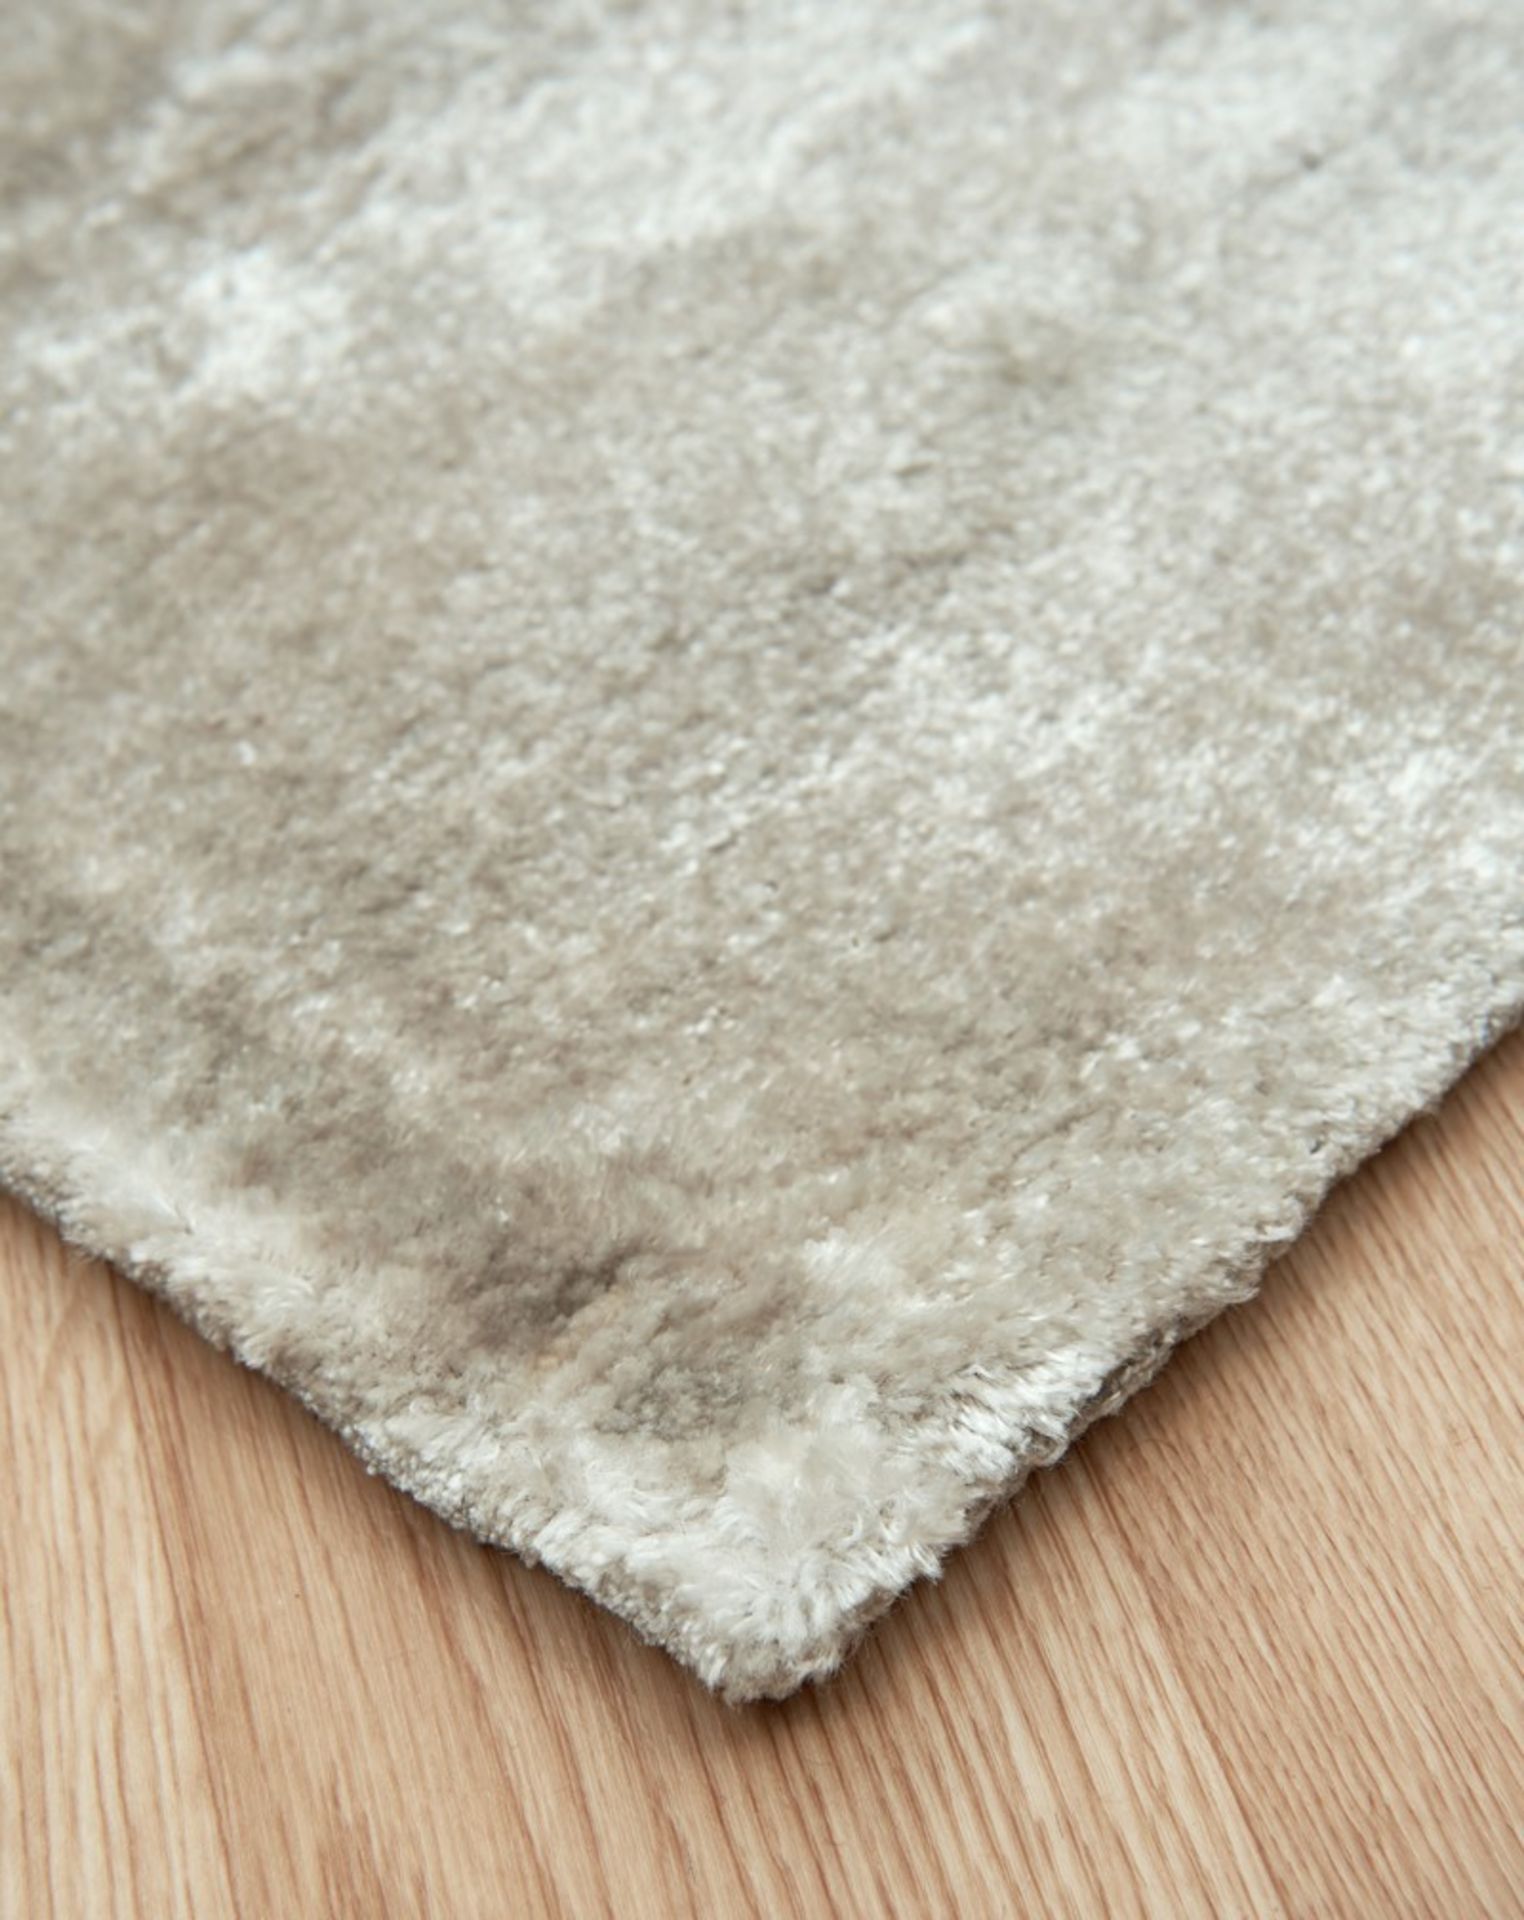 1 x Asiatic 'Dolce' Luxurious Hand-woven Rug In Silver - Handmade in India - 120x180cm - RRP £339.99 - Image 3 of 3